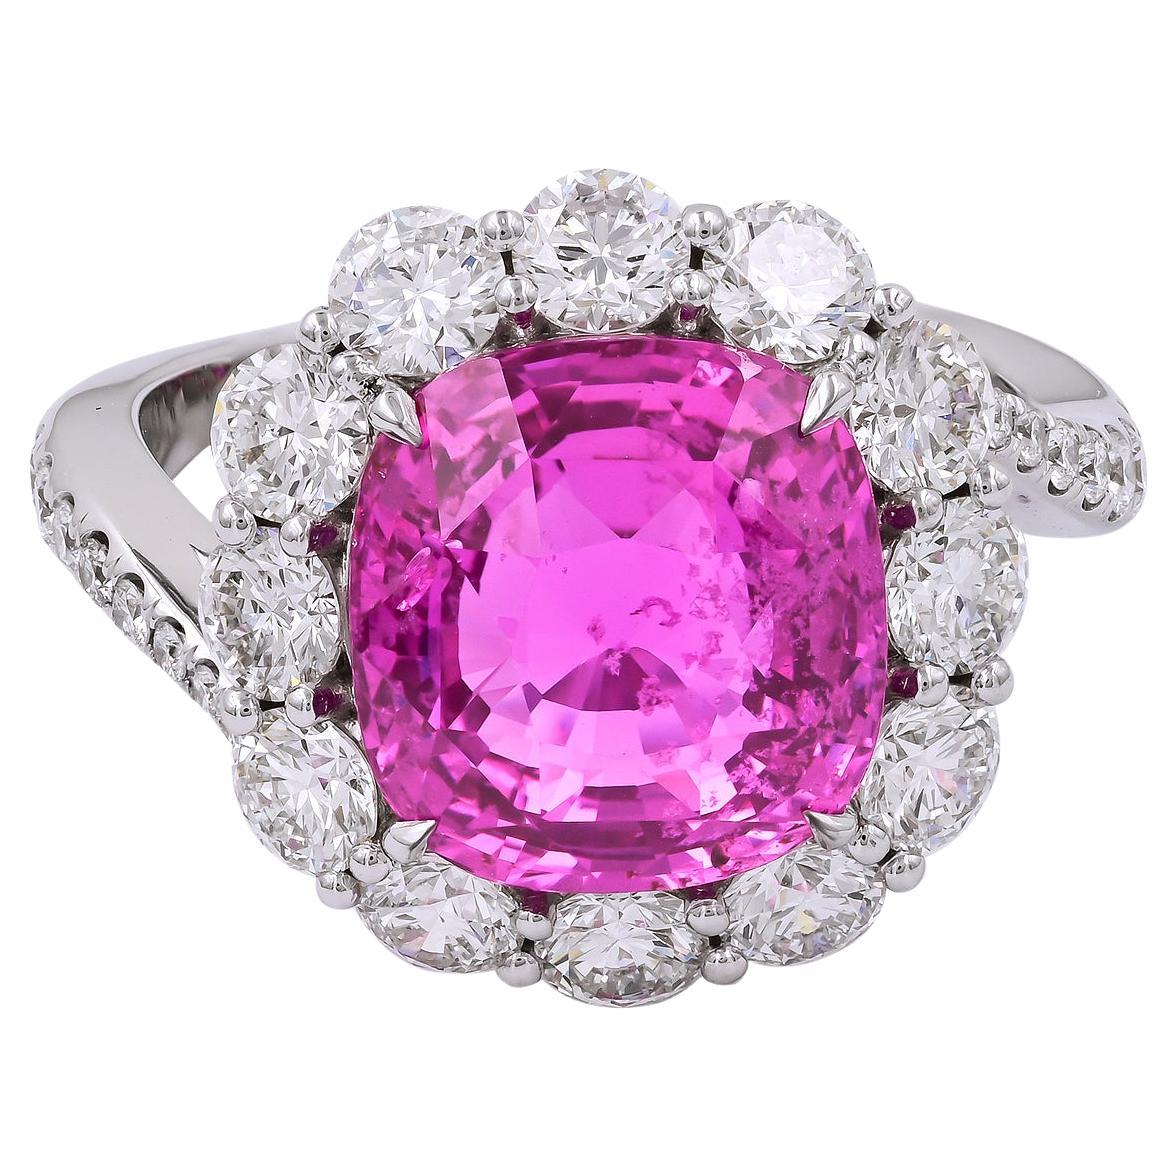 Spectra Fine Jewelry GRS Certified 7.08 carat Cushion Pink Sapphire Ring